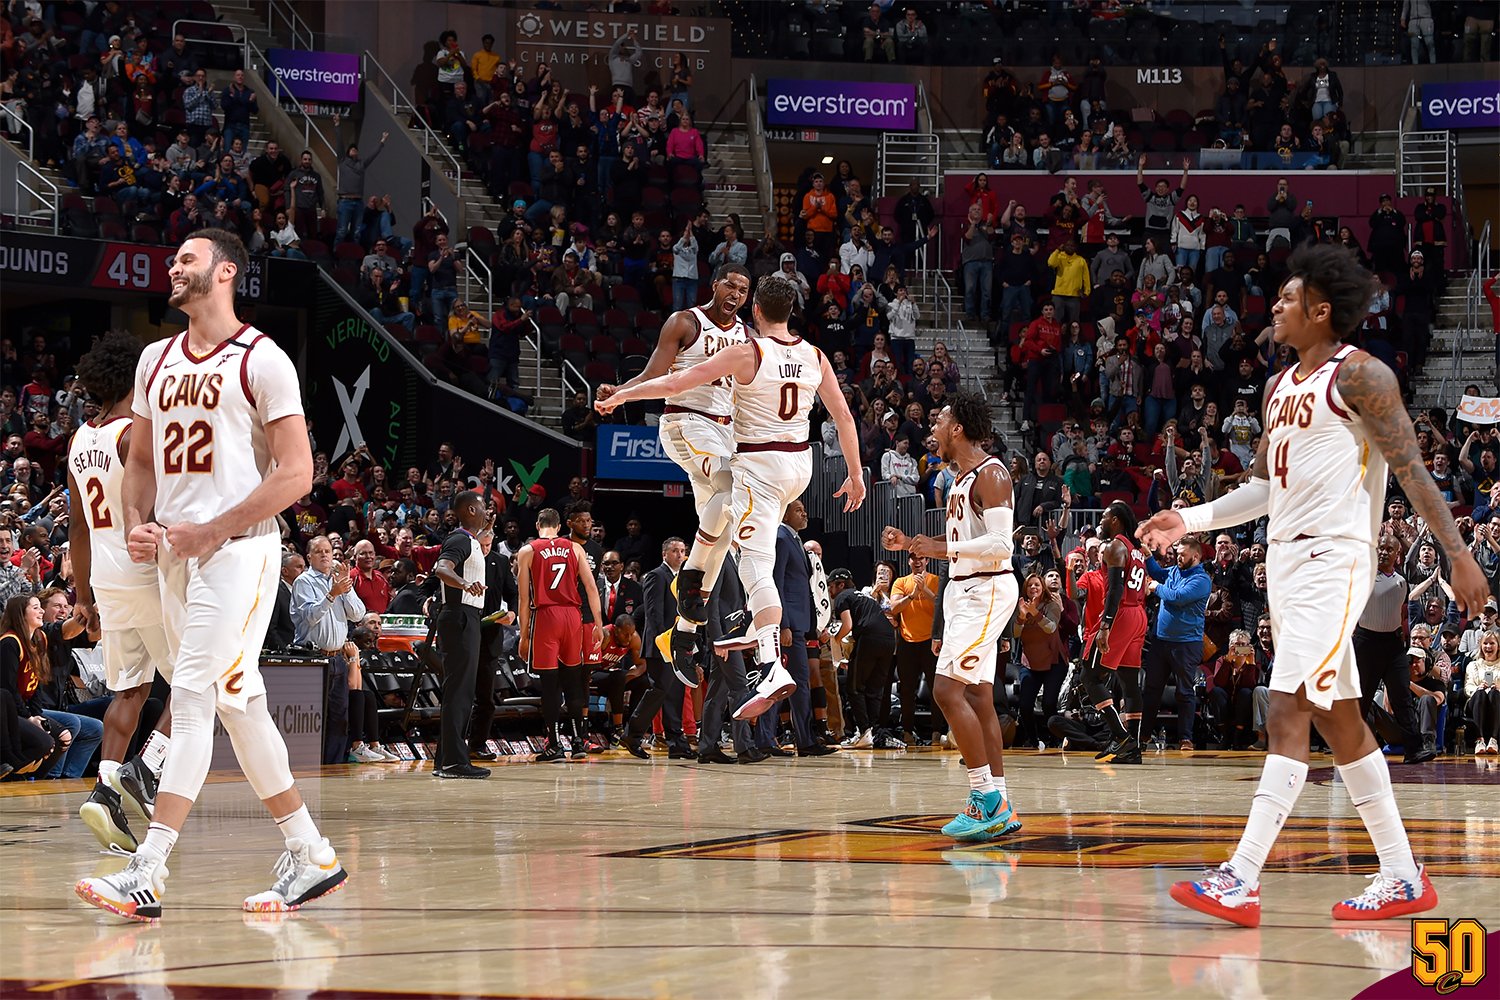 Cavs rally from 22 down, drop Heat in OT